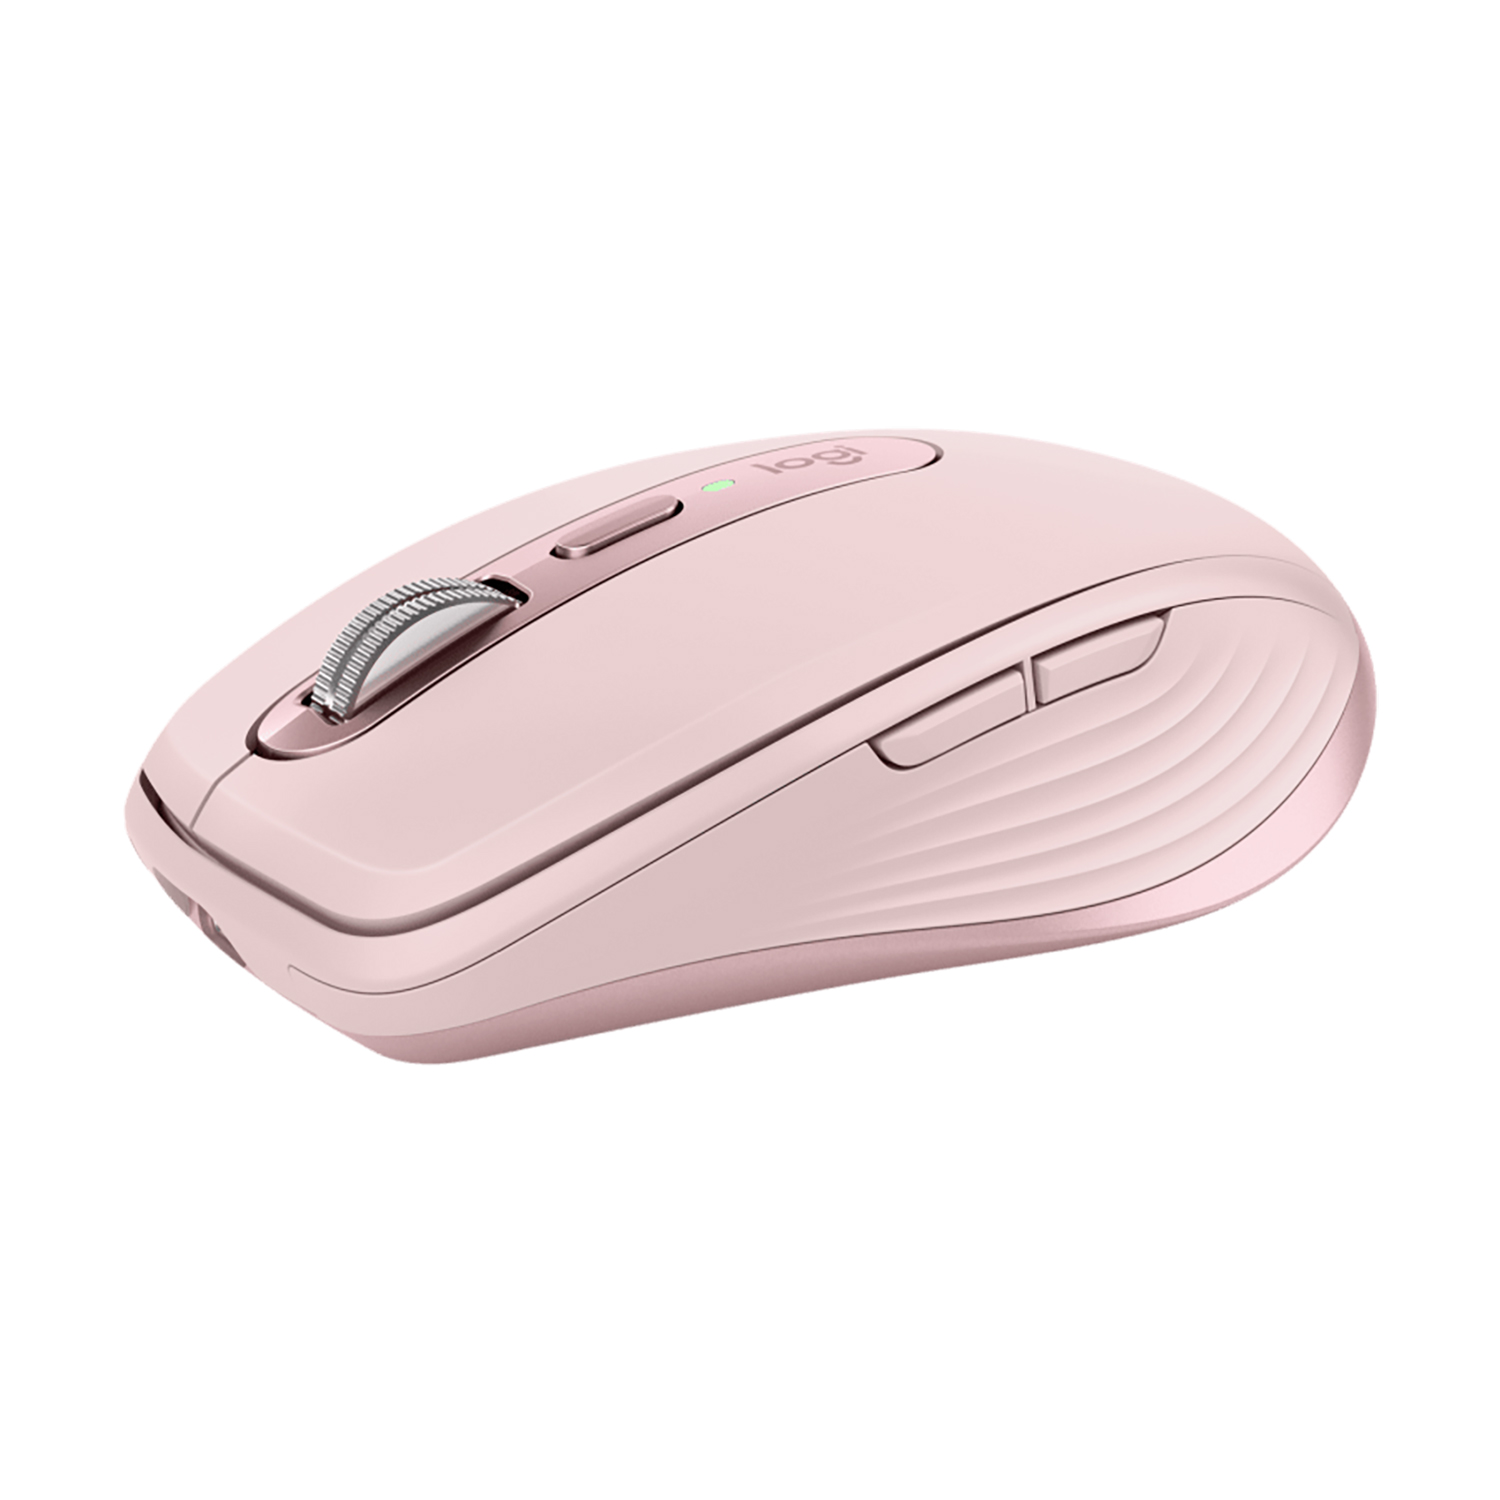 Logitech MX Anywhere 3 Wireless Compact Performance Mouse - Rose